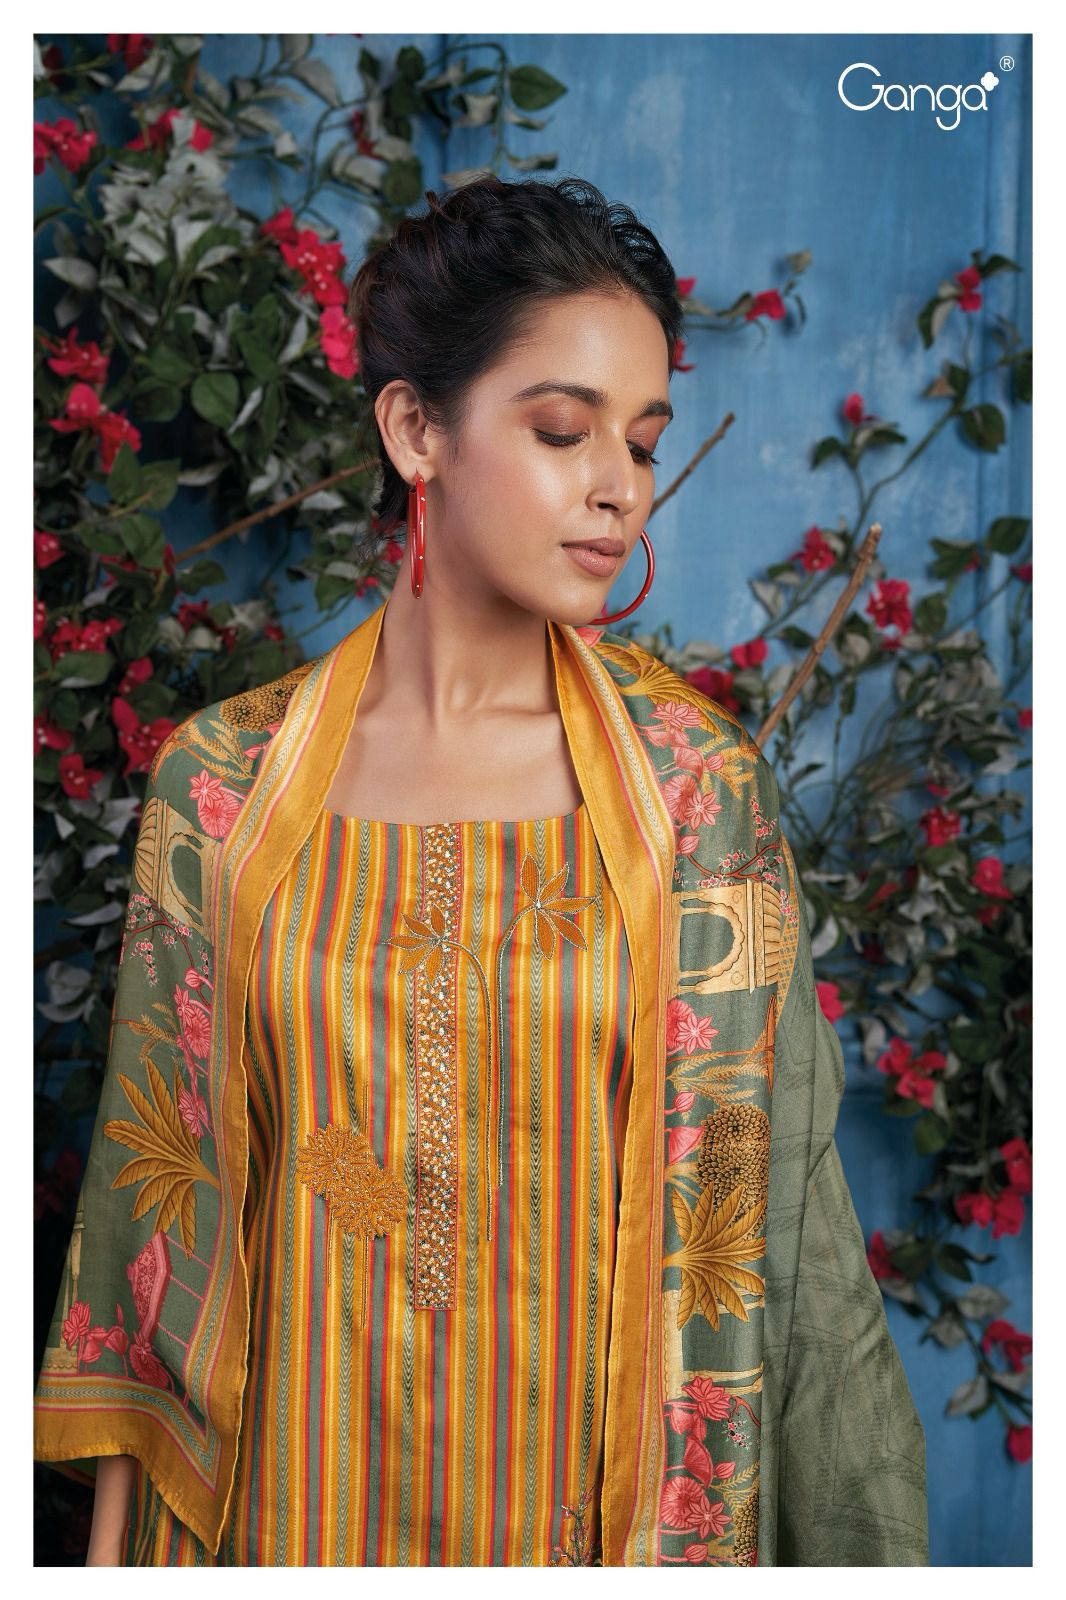 Claire 2103 Ganga Cotton Silk Plazzo Style Suits